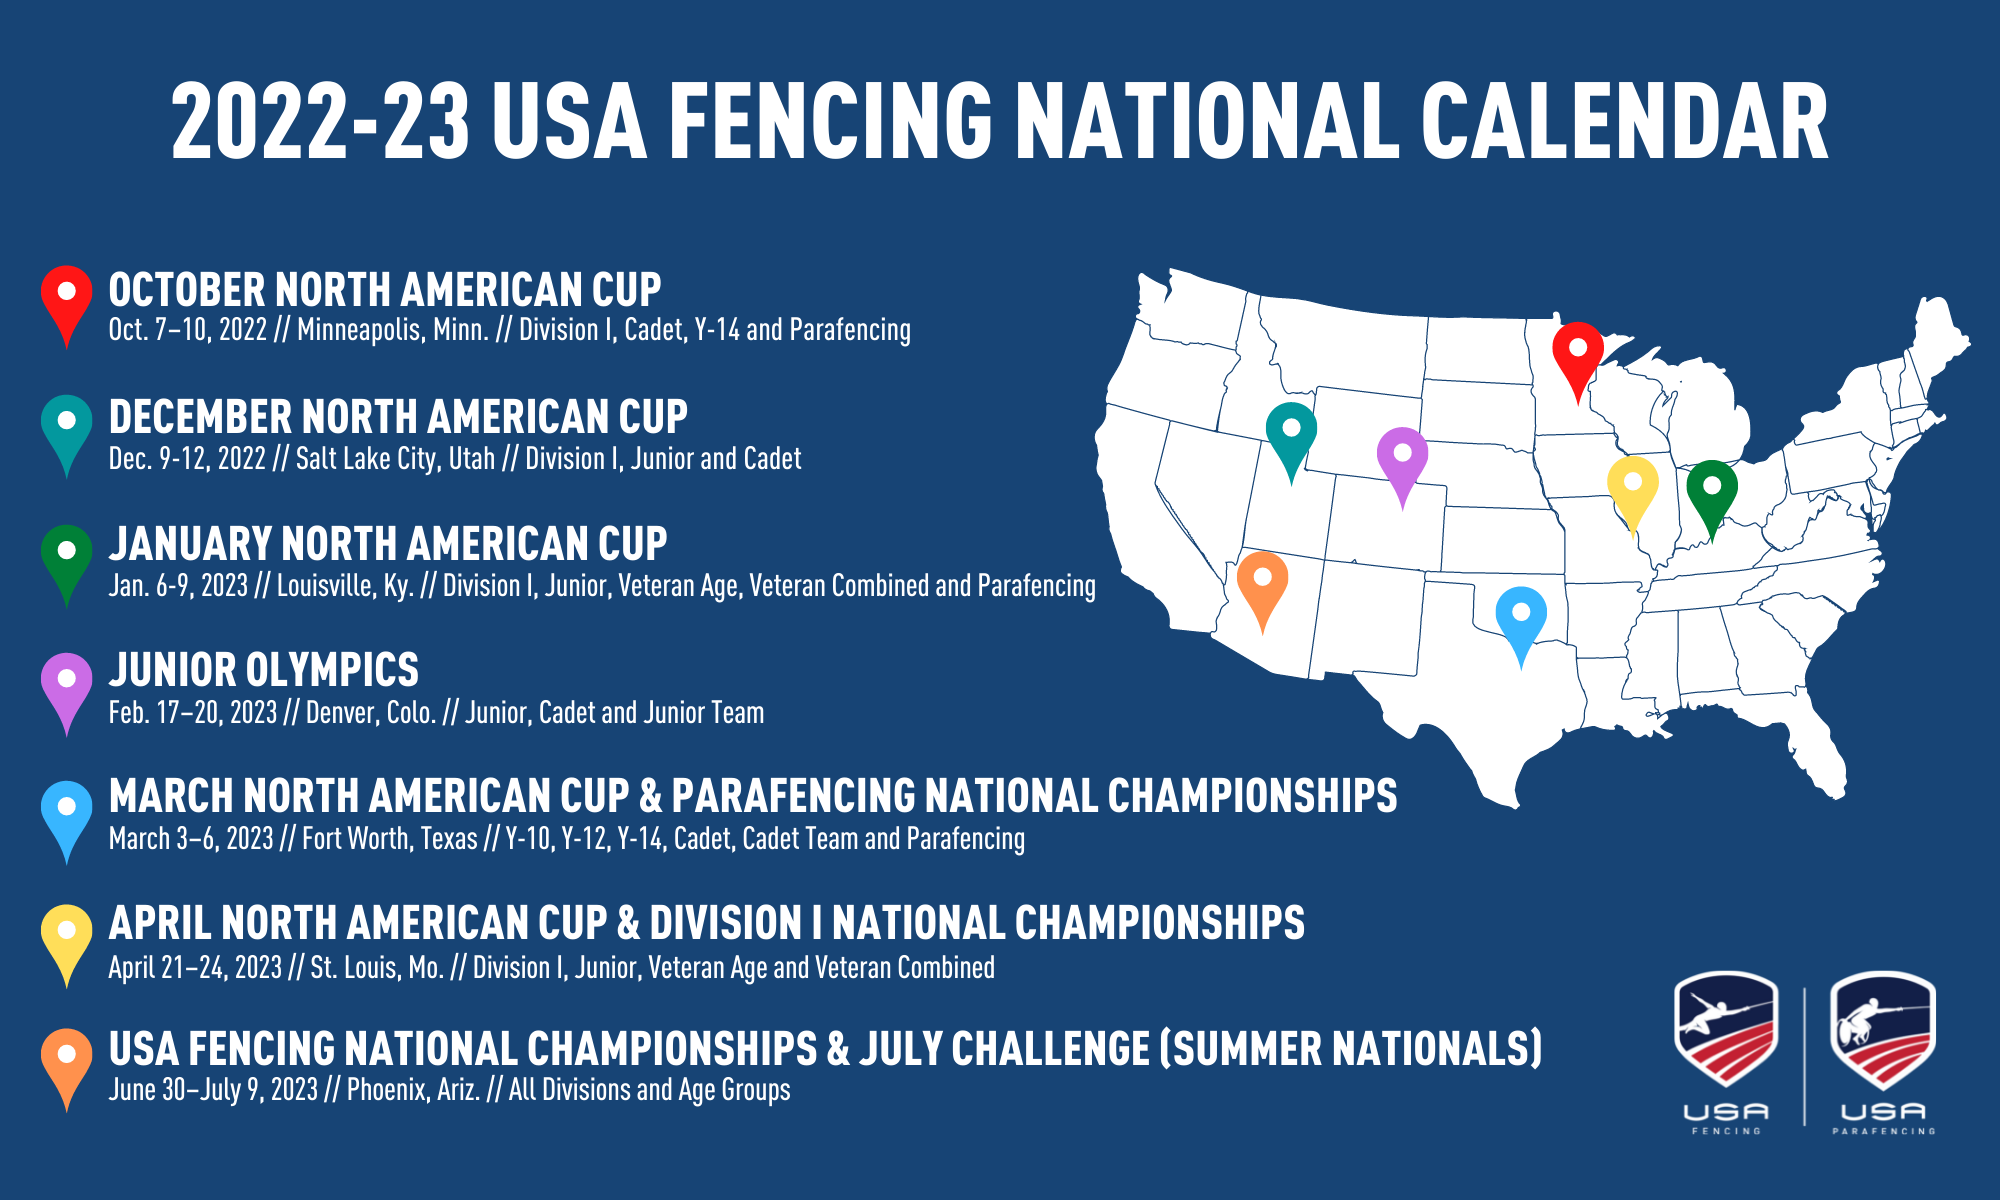 2022-23 USA Fencing Schedule Announced – SoCal Division